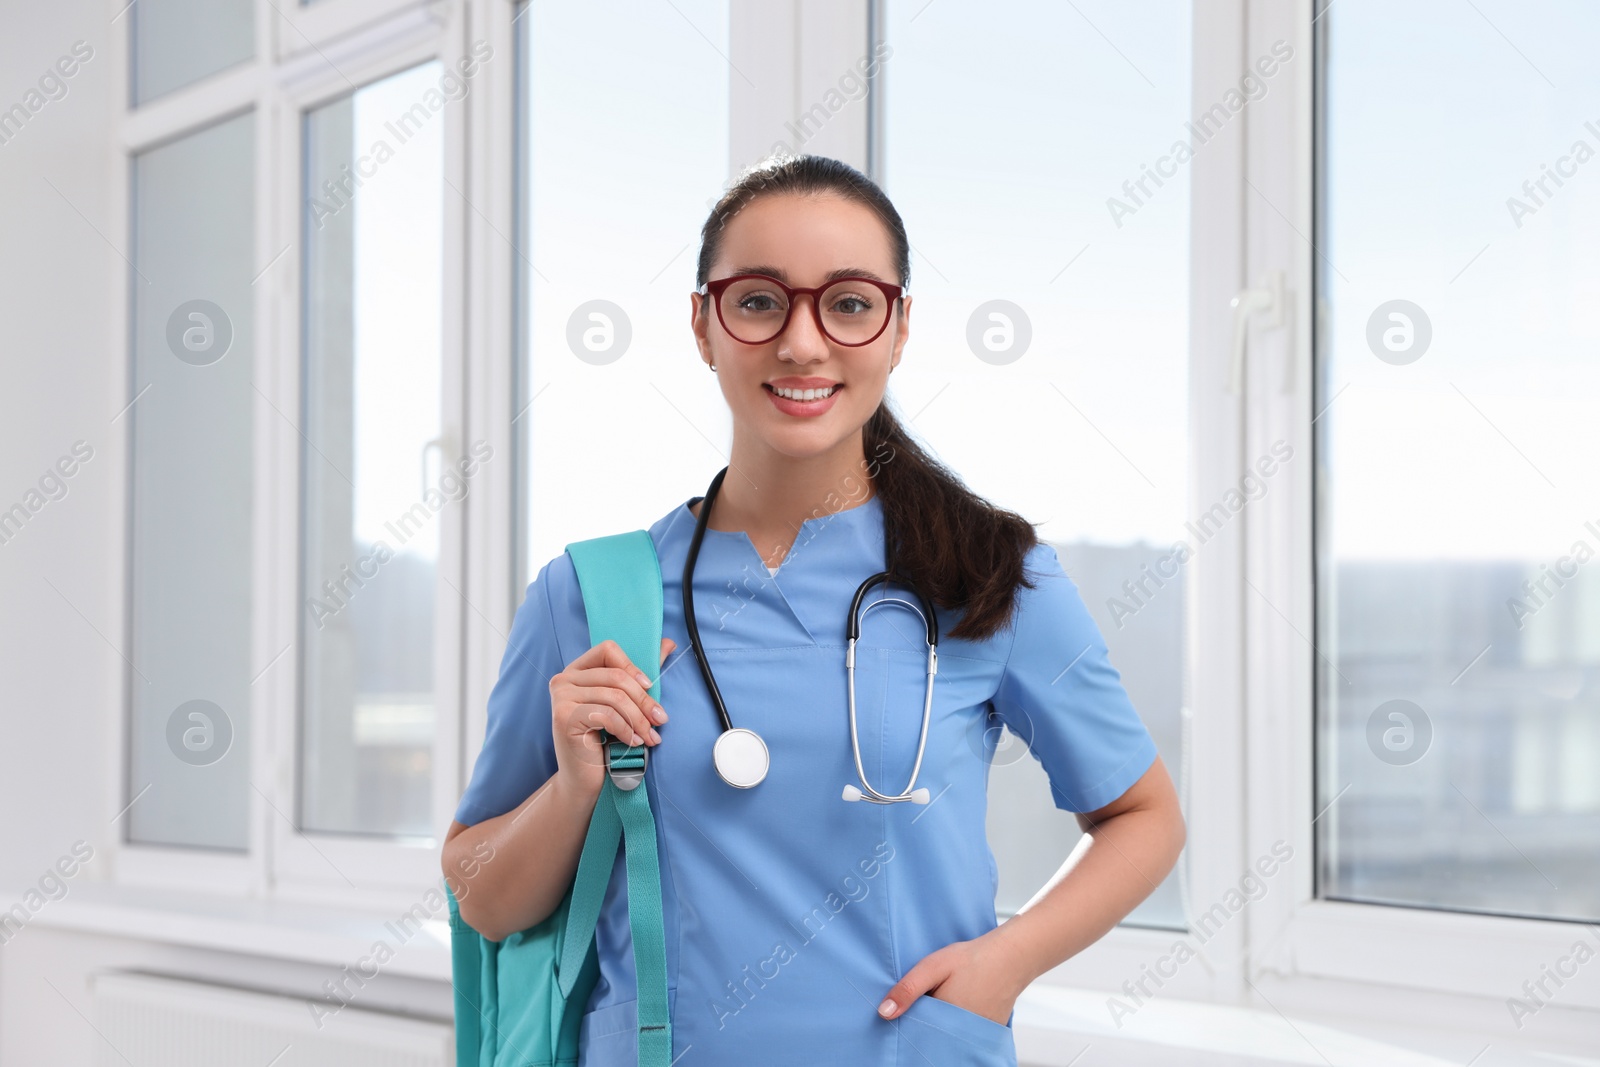 Photo of Smart medical student with stethoscope in college hallway